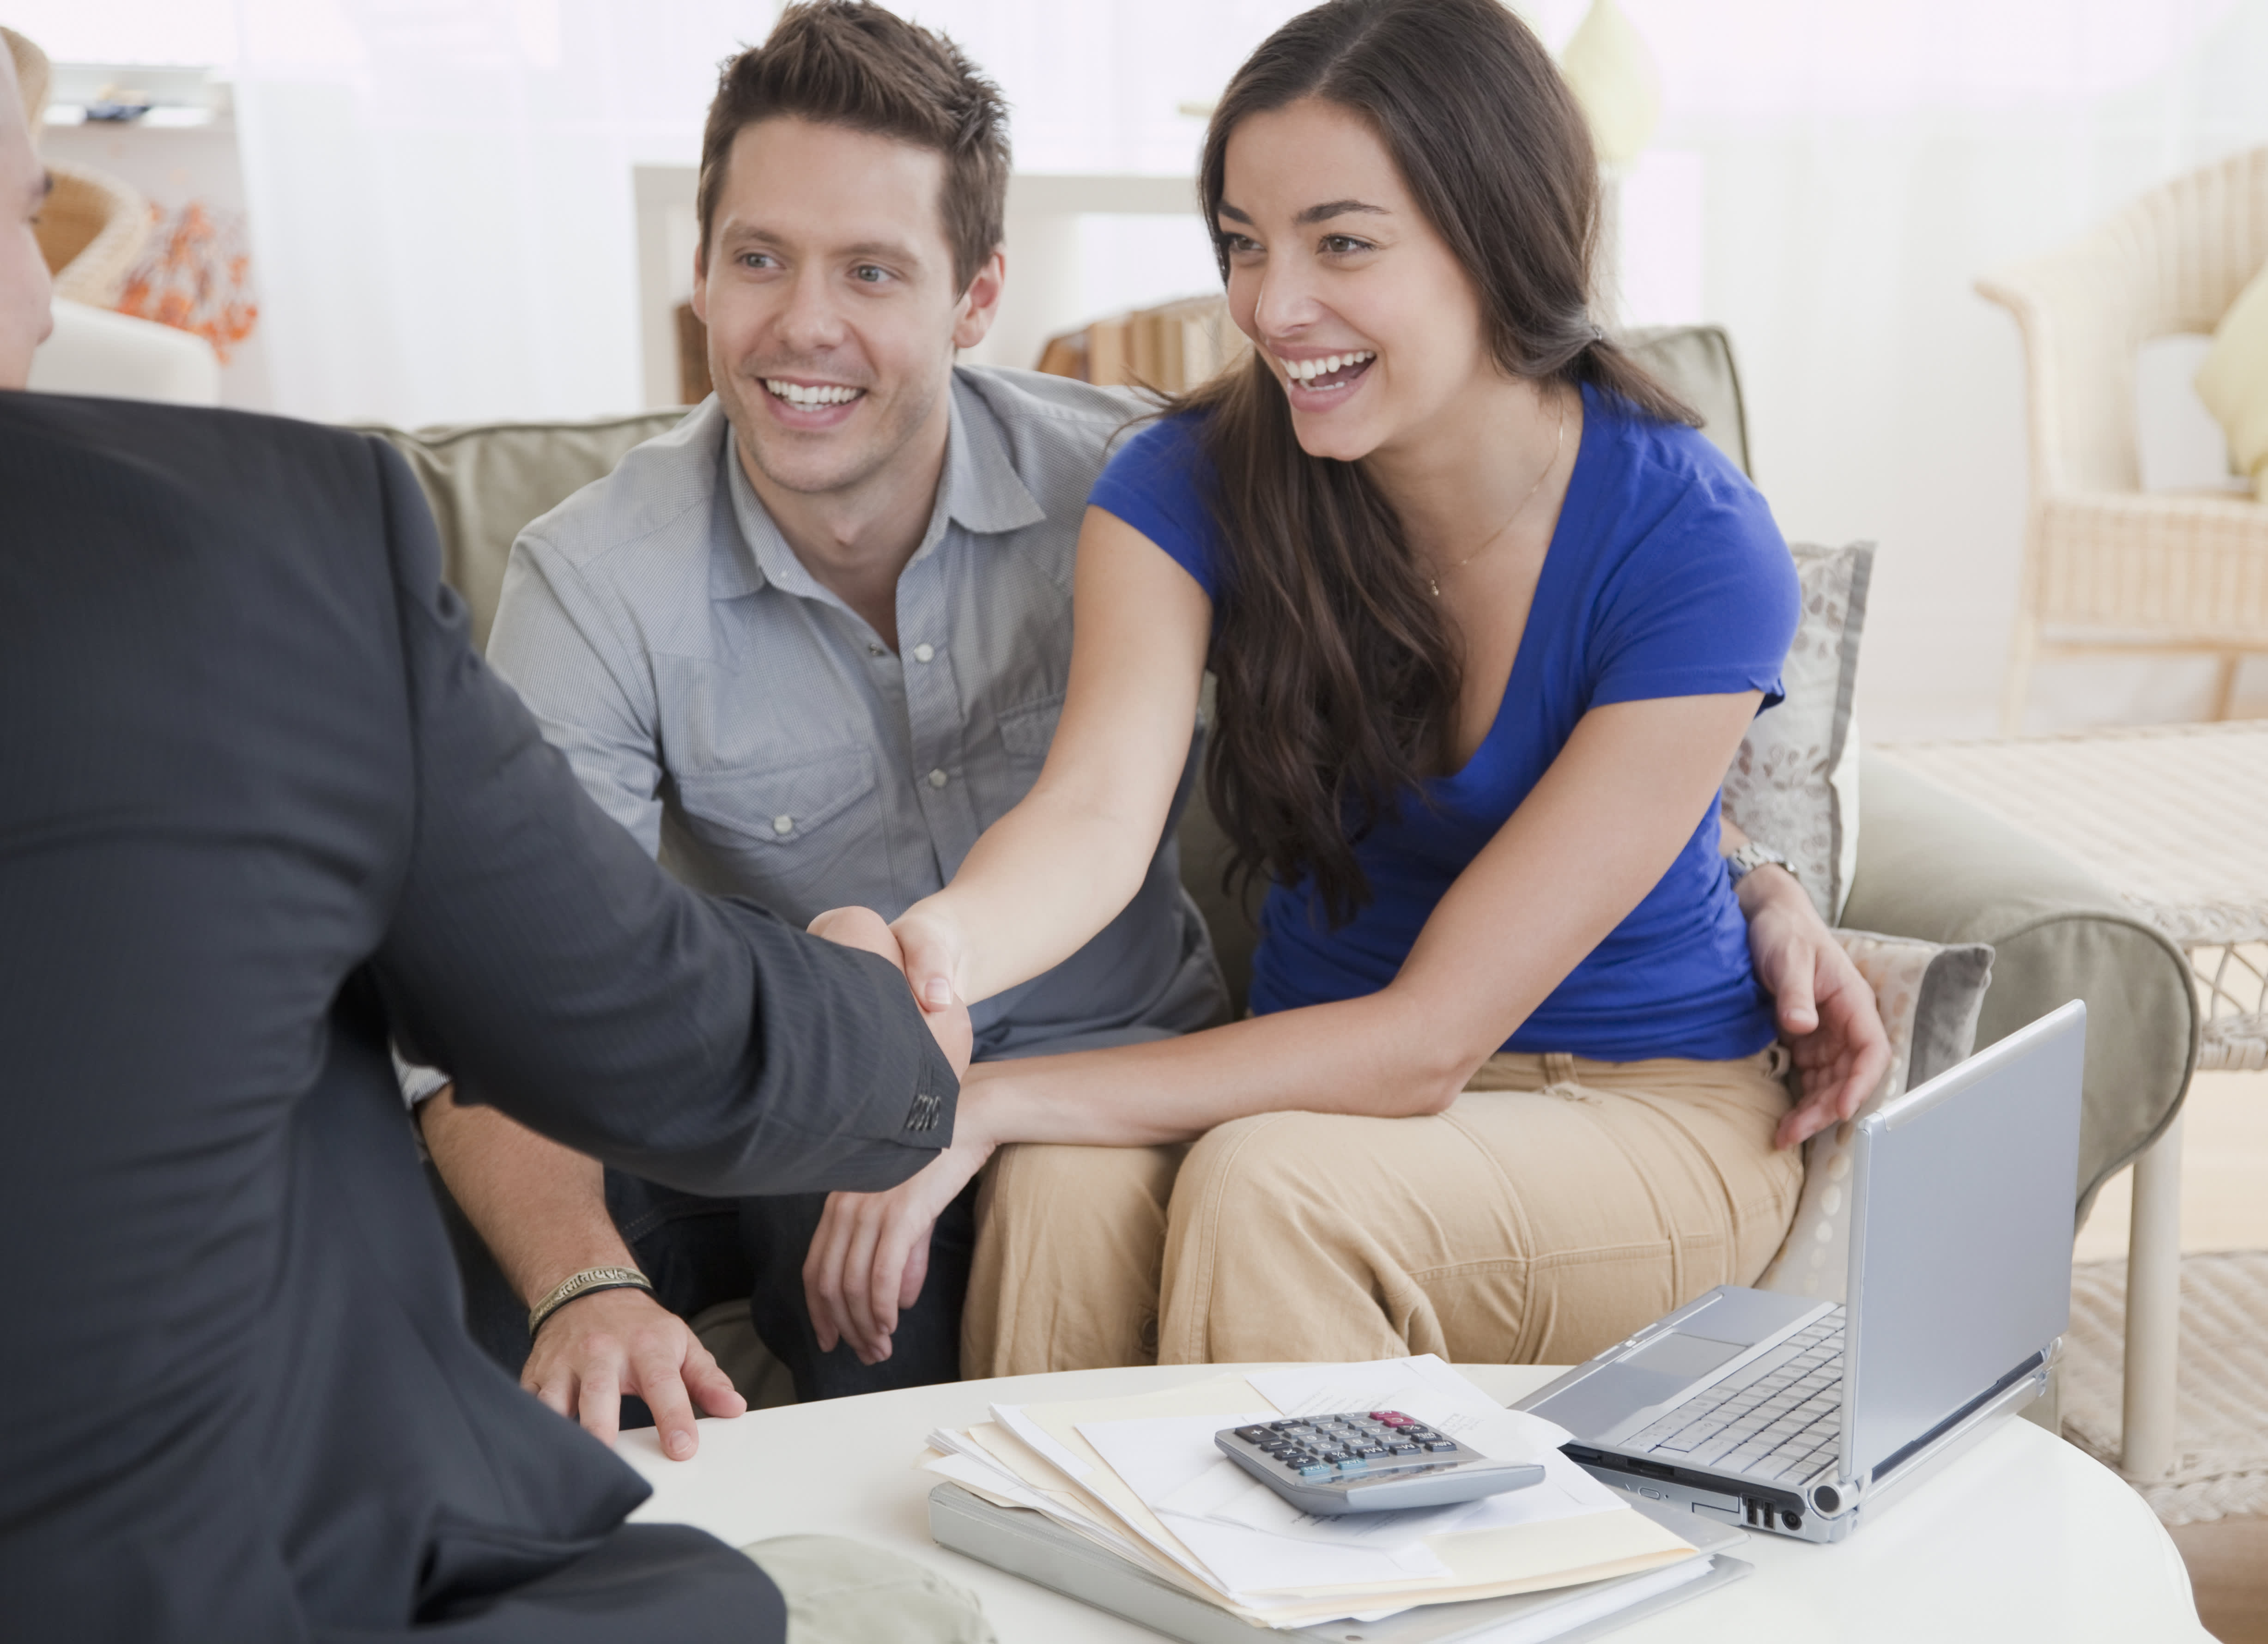 How financial advisors can attract millennial clients